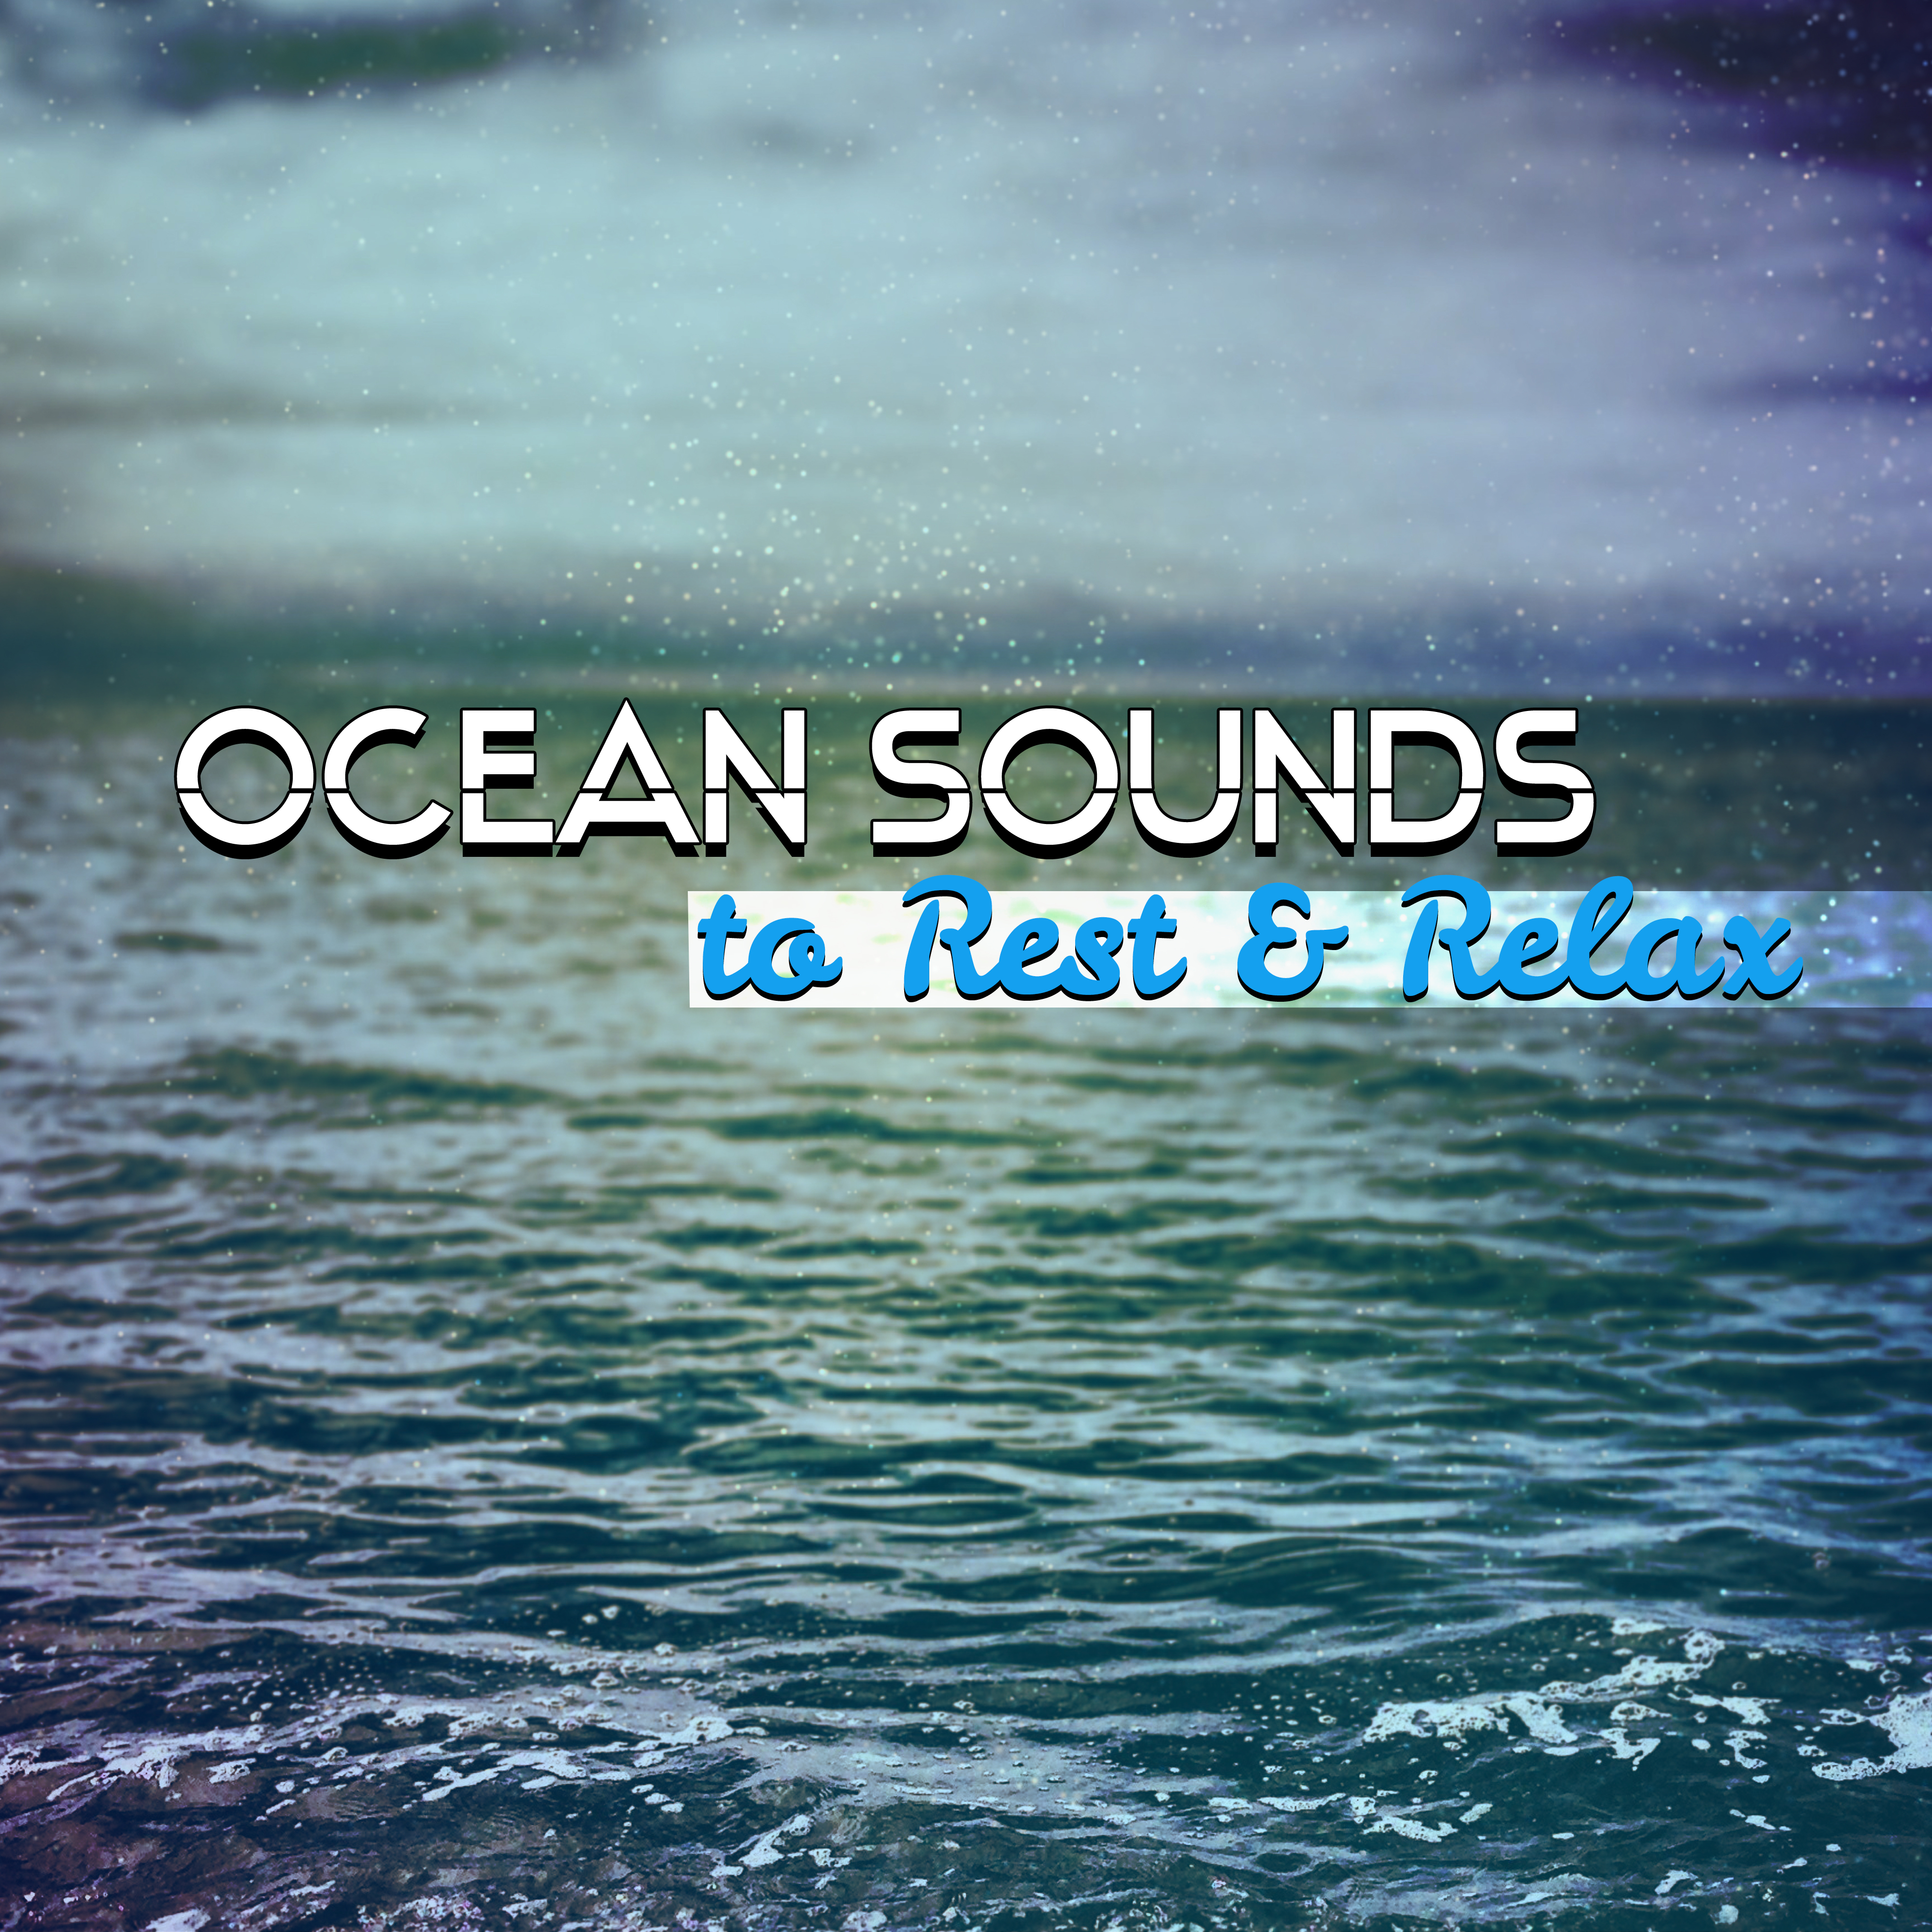 Ocean Sounds to Rest  Relax  Soothing Nature Waves, Inner Harmony, Self Improvement, Healing Water